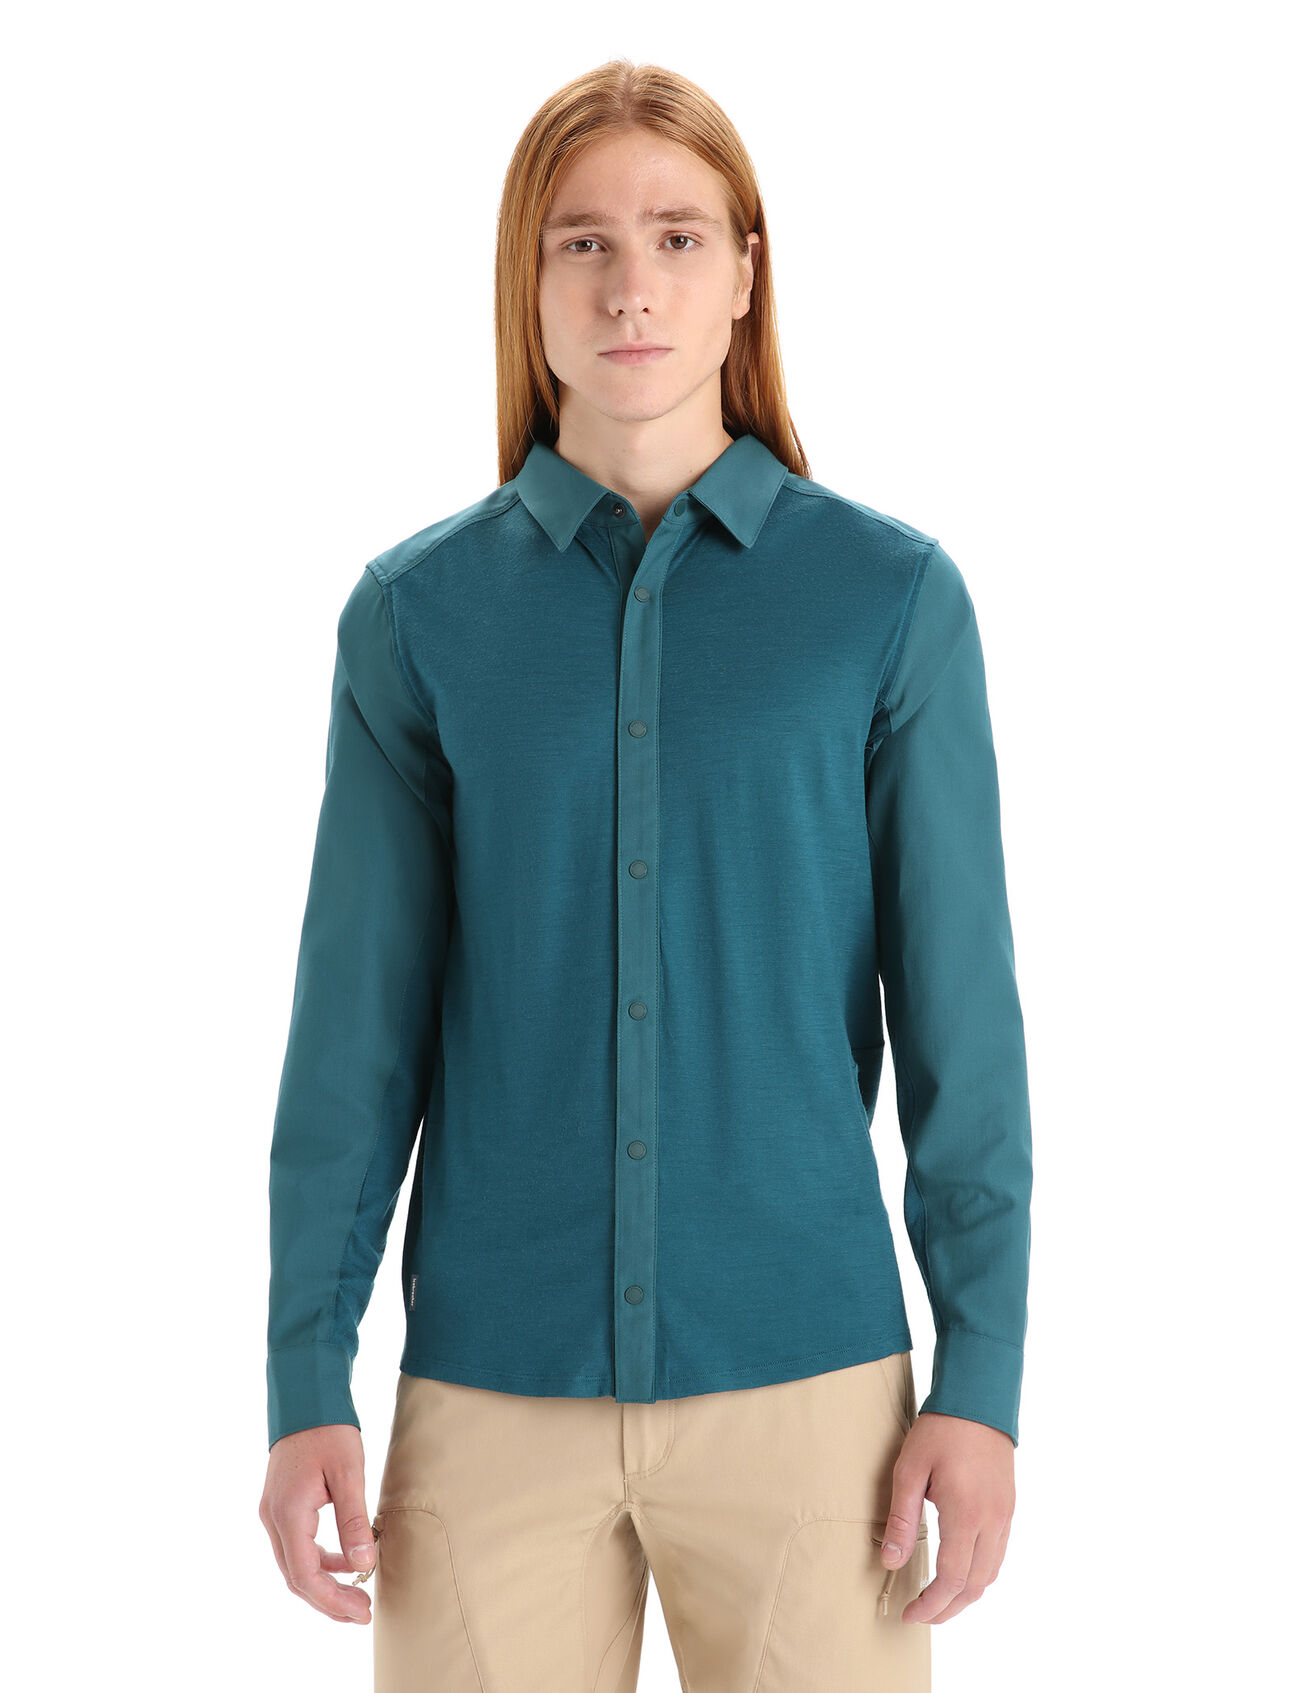 Mens Merino Hike Long Sleeve Top A lightweight and breathable merino shirt ideal for mountain adventures, the Hike Long Sleeve Top also provides the casual style for whatever comes after.